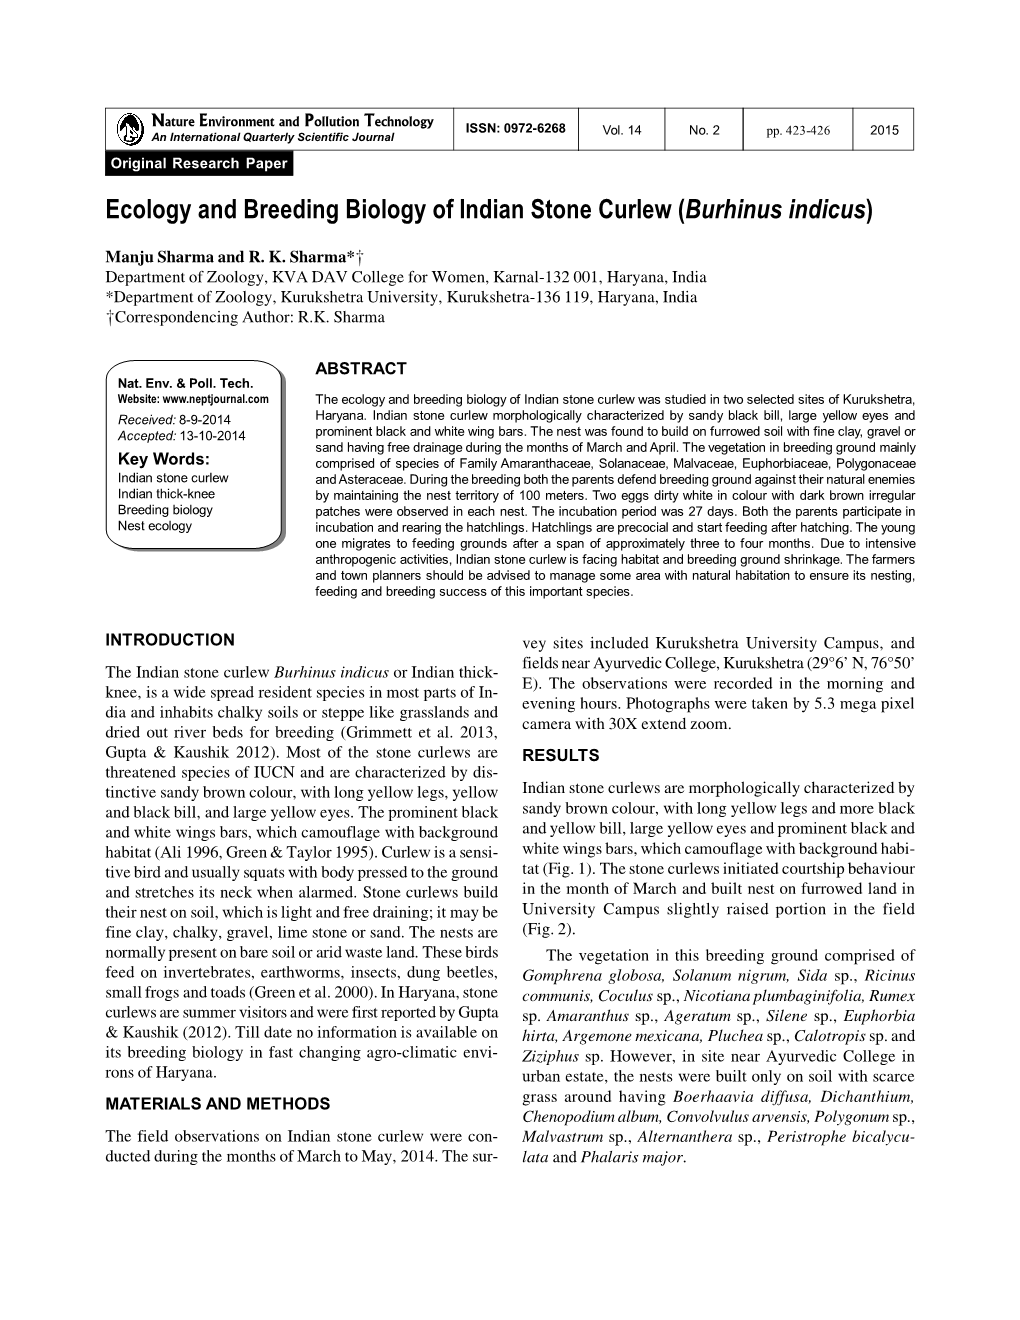 Ecology and Breeding Biology of Indian Stone Curlew (Burhinus Indicus)